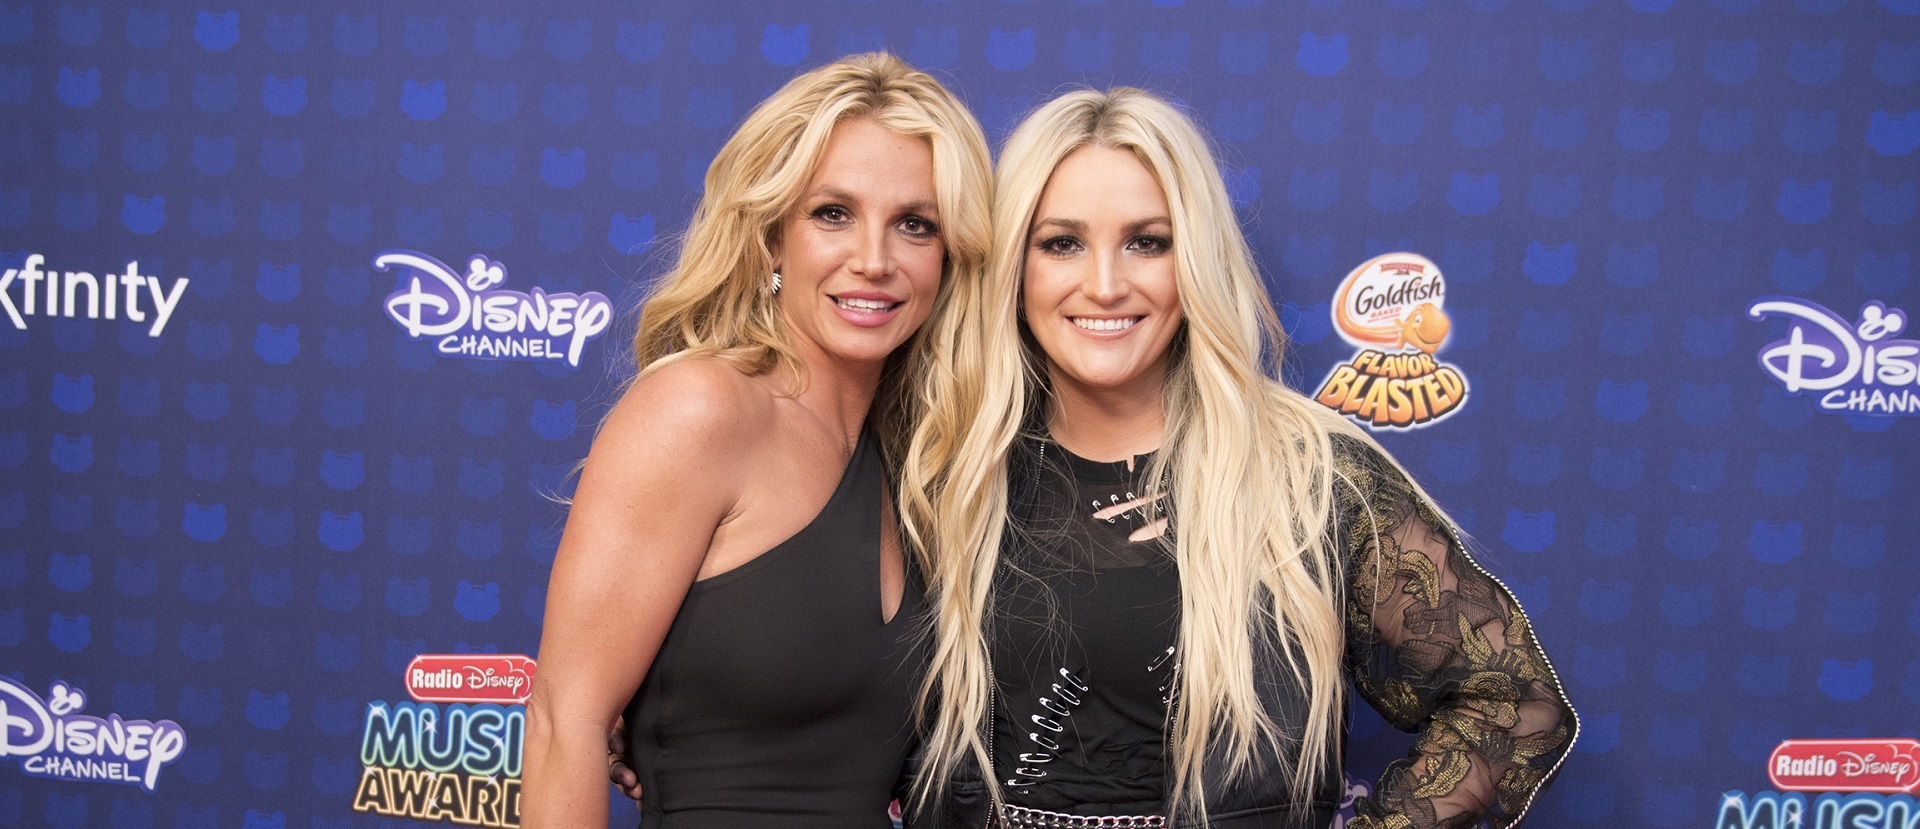 Jamie Lynn Spears Posts About Peace Following Call Out From Sister Britney Spears